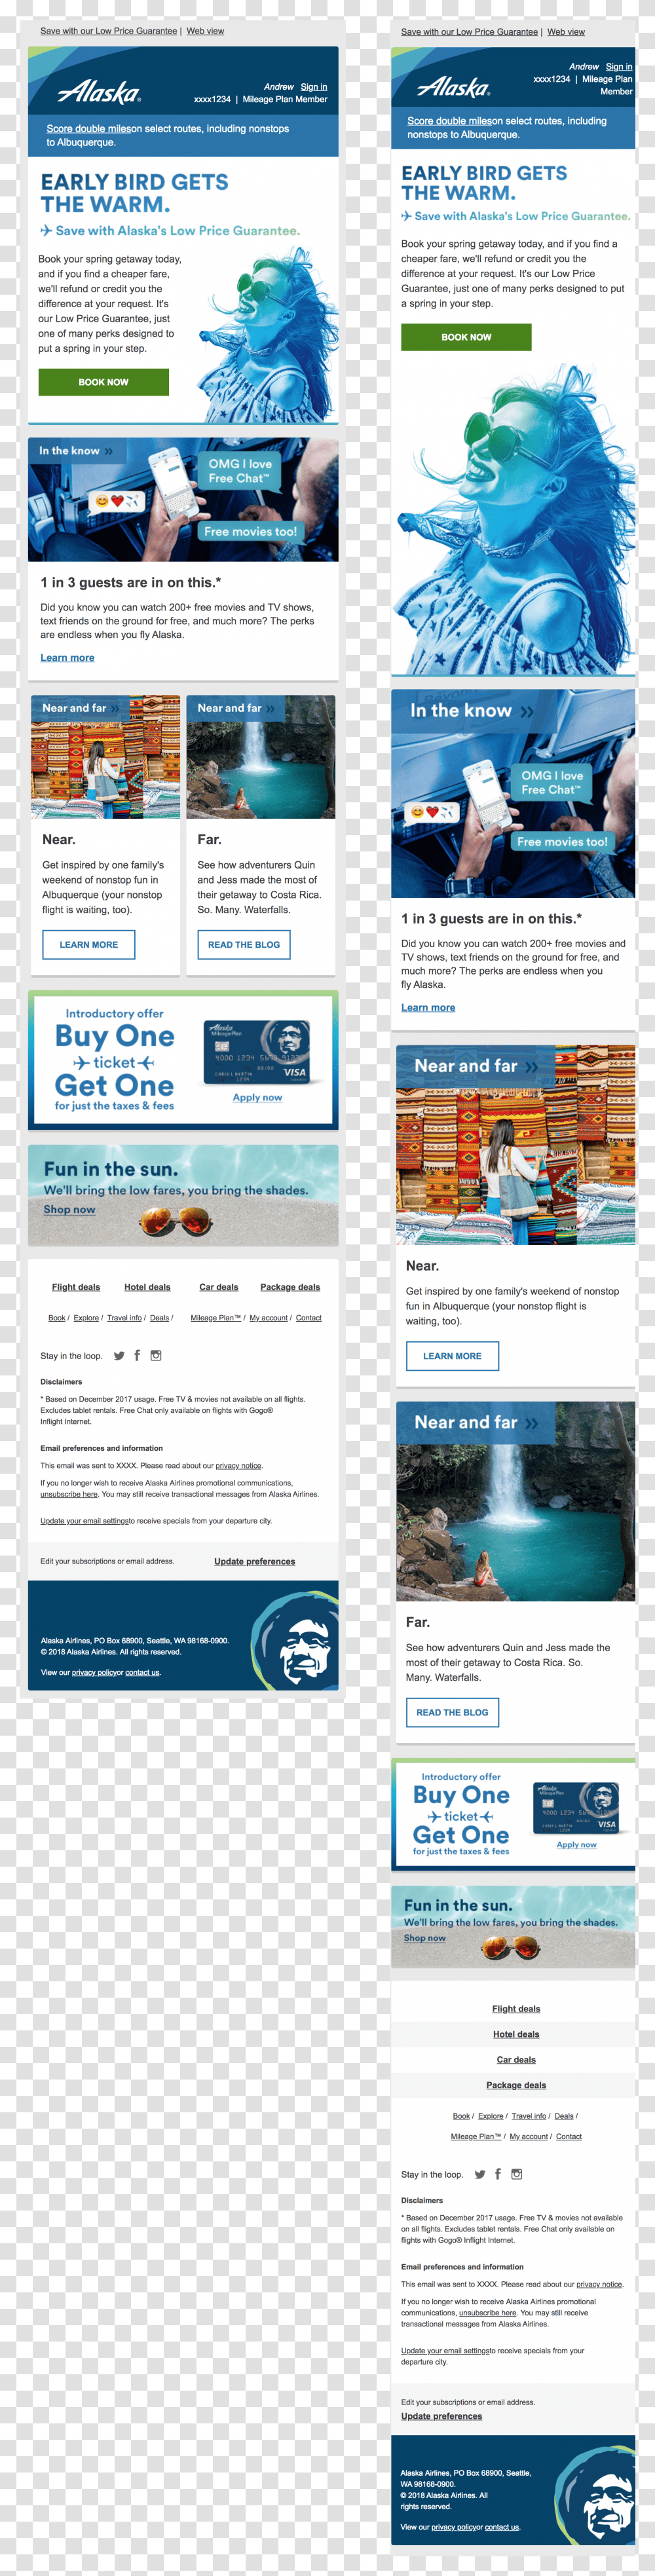 Beautiful Responsive Email From Alaska Airlines Online Advertising Transparent Png